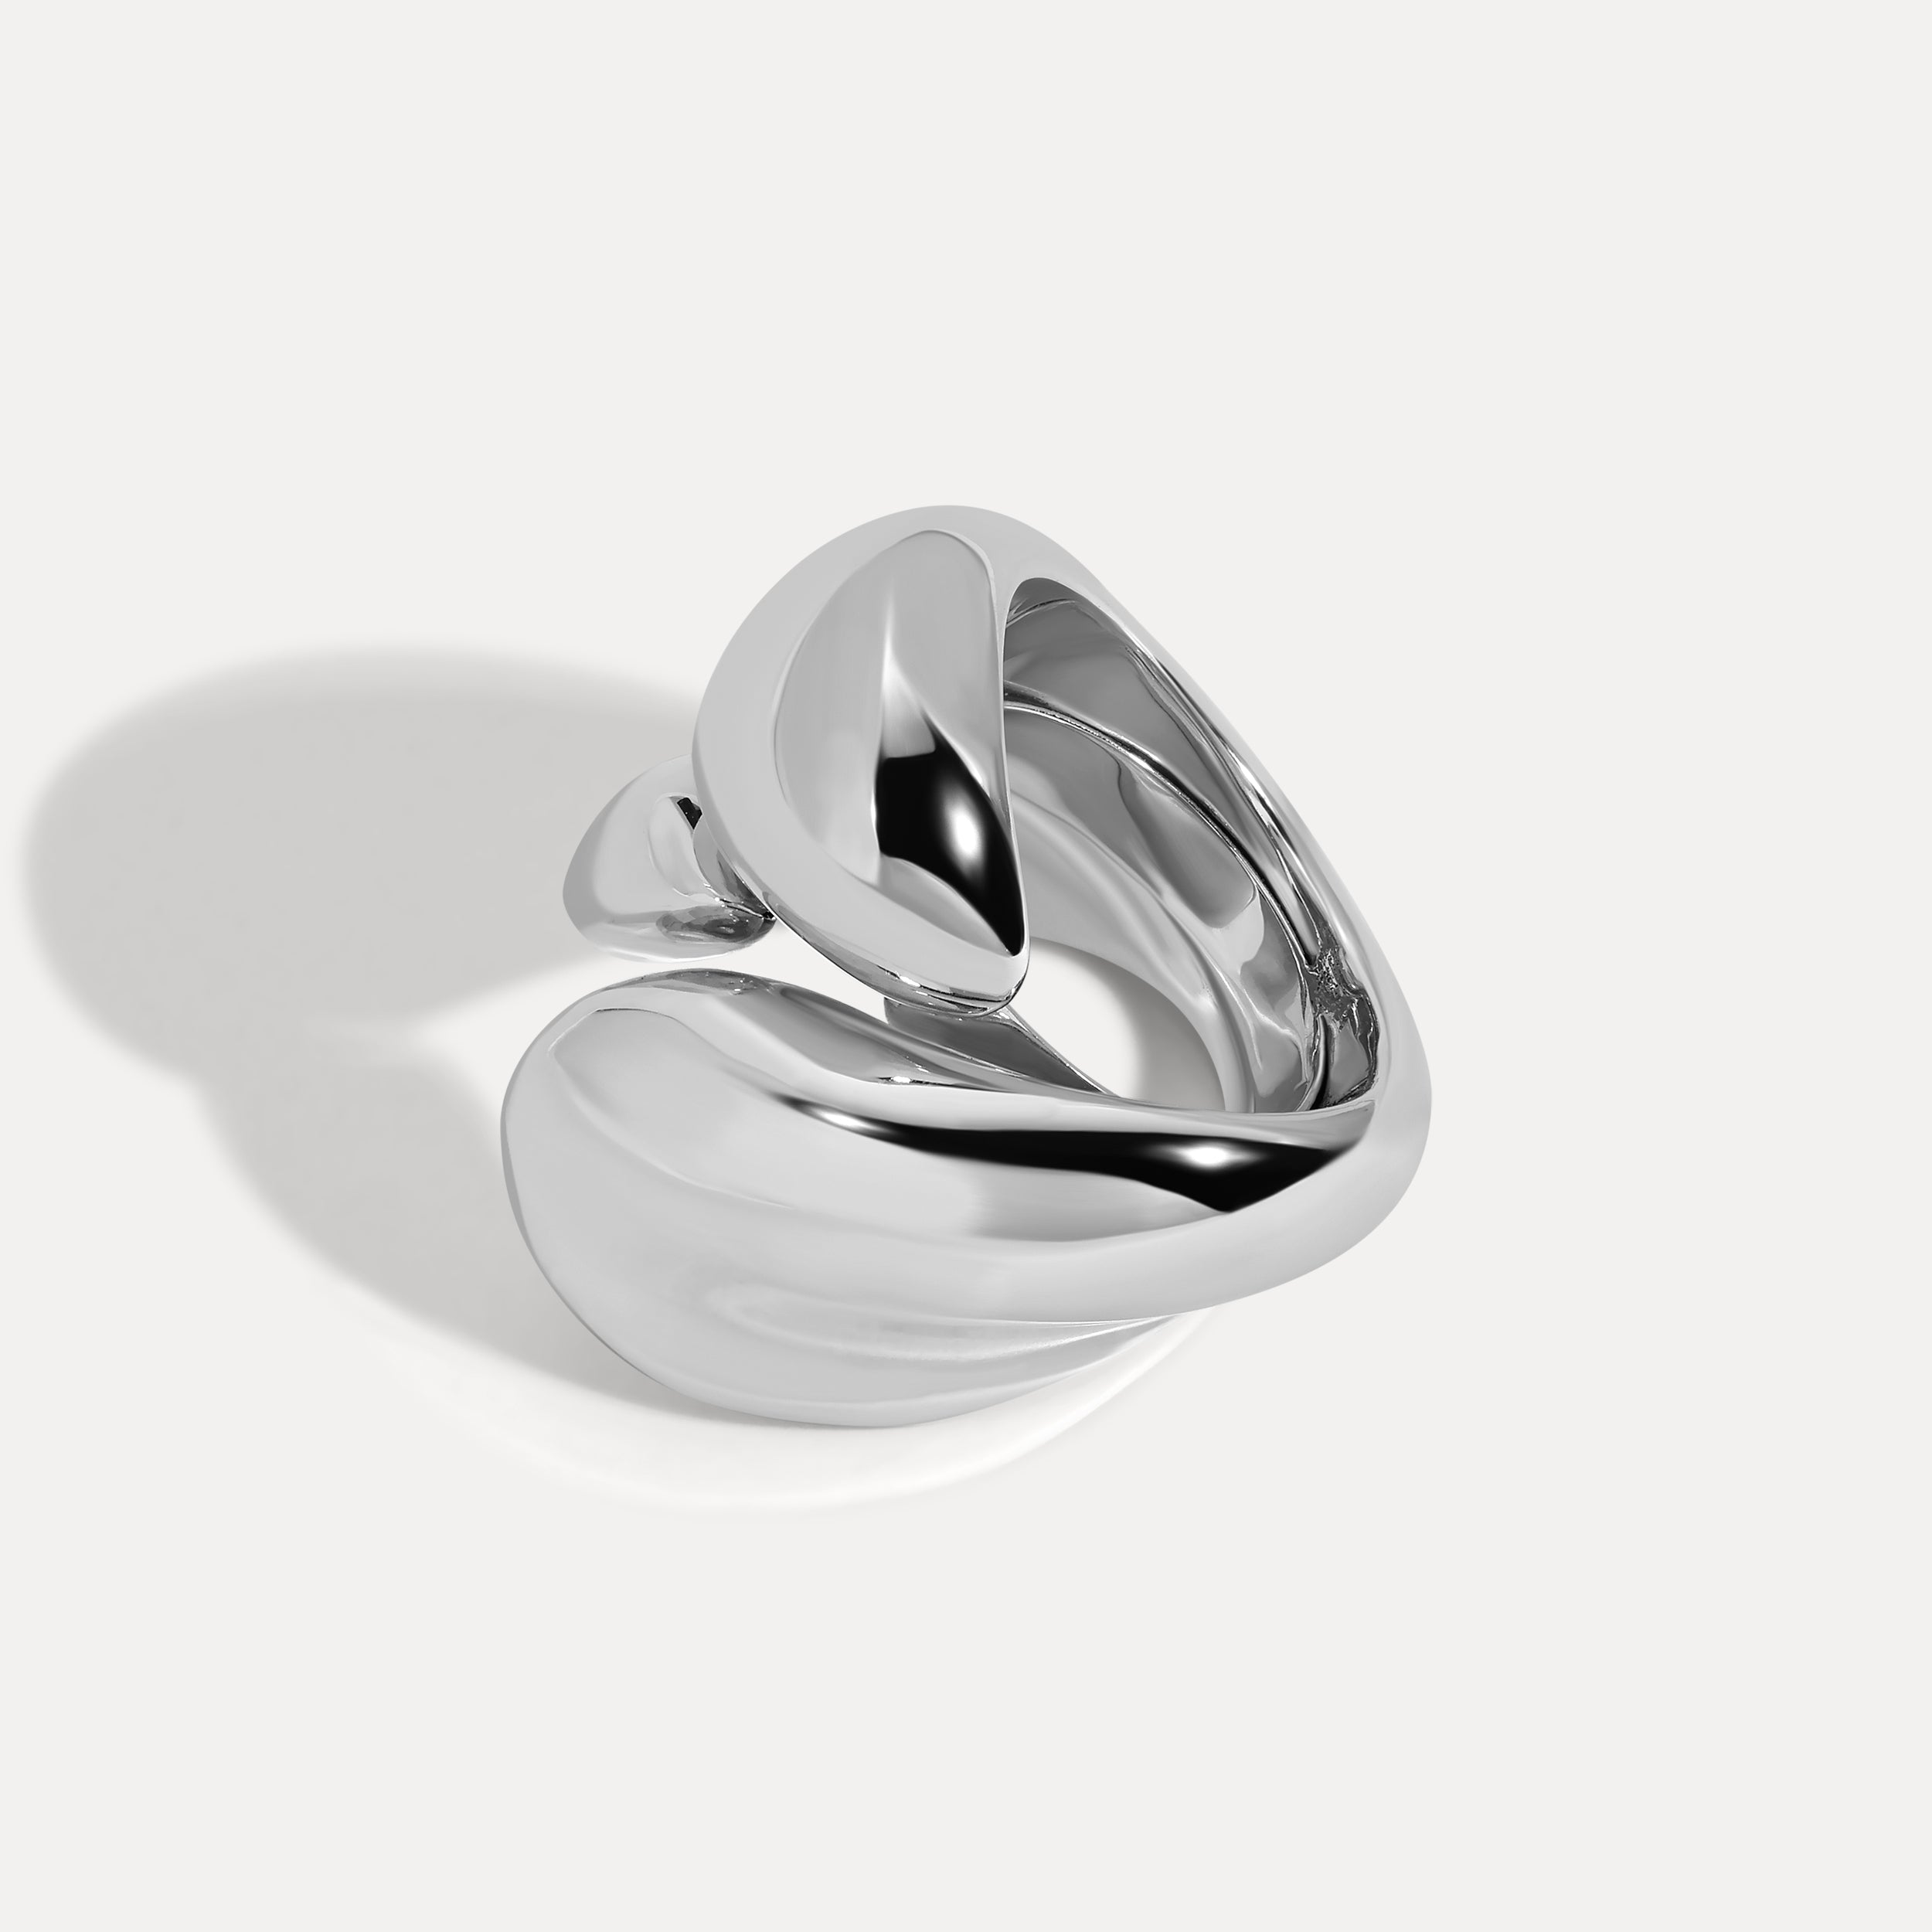 Zion Abstract Ring